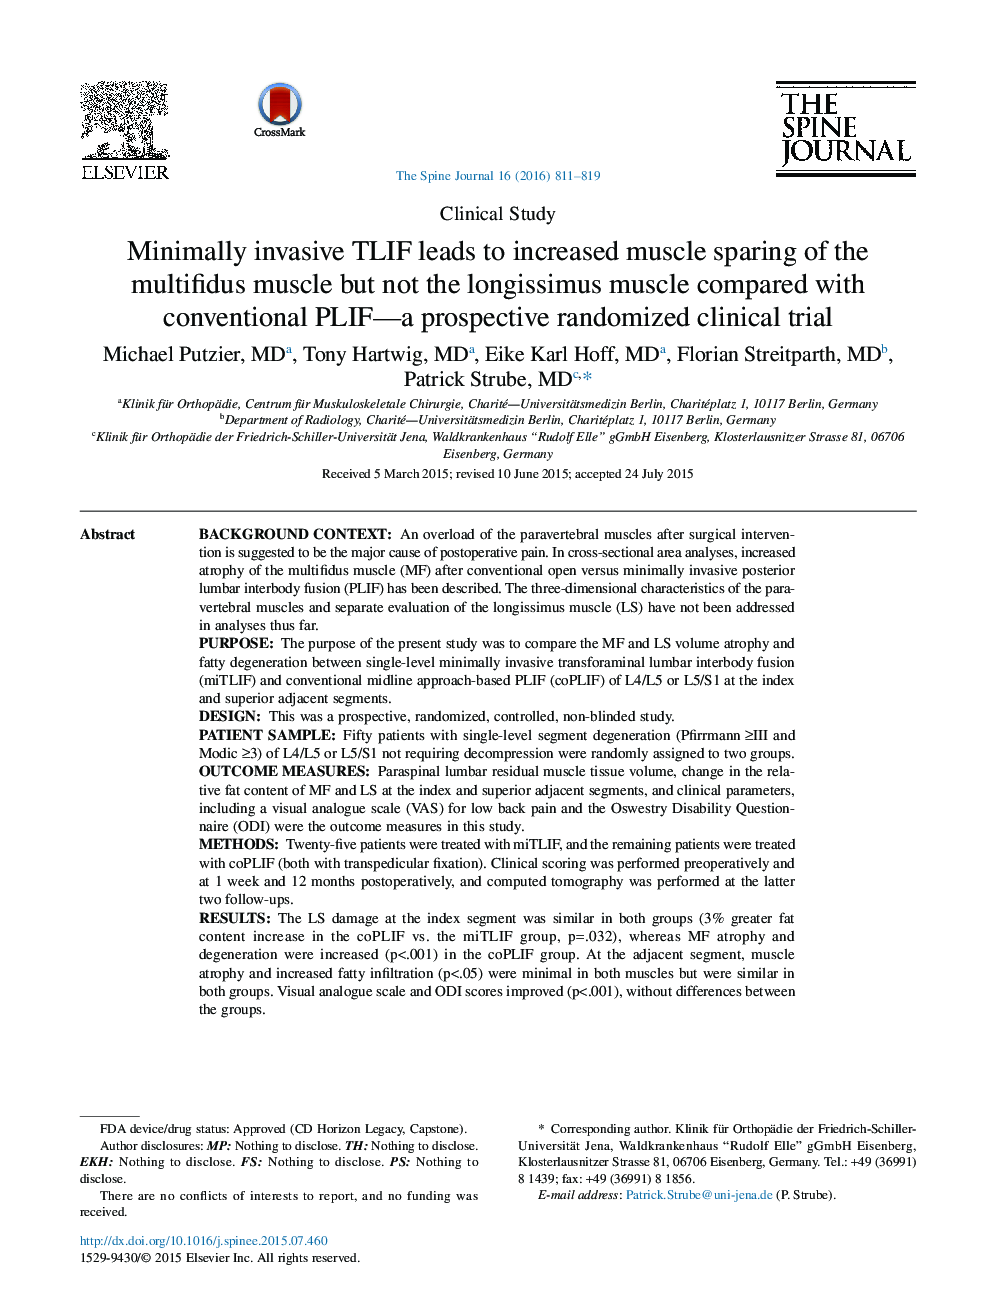 Minimally invasive TLIF leads to increased muscle sparing of the multifidus muscle but not the longissimus muscle compared with conventional PLIF—a prospective randomized clinical trial 